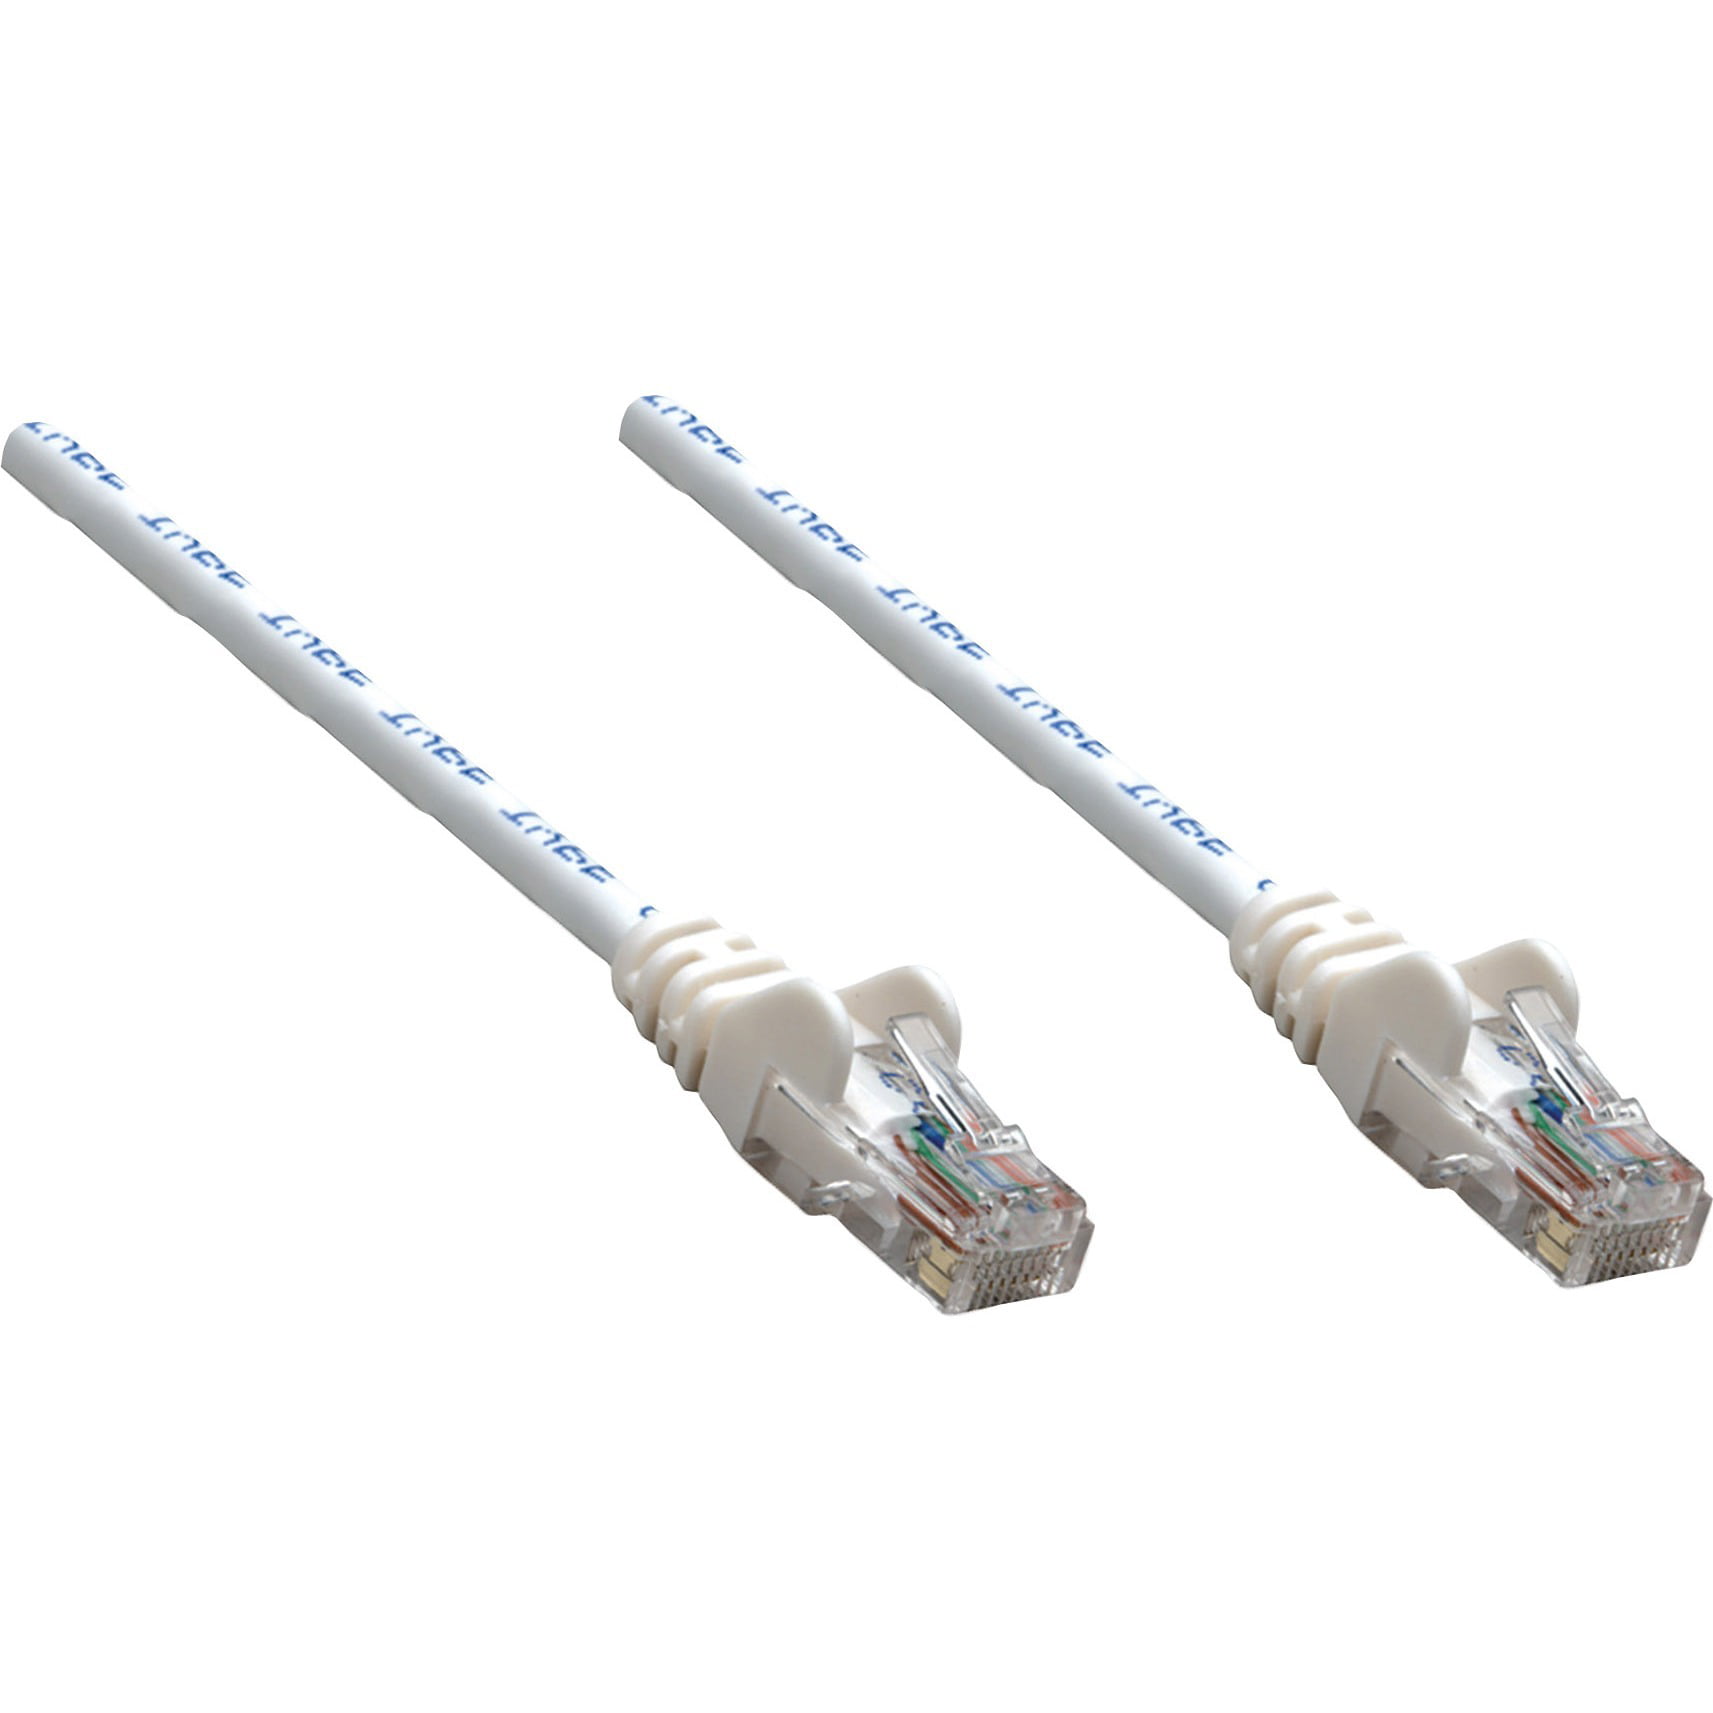 CAT5E UTP NETWORK PATCH CABLE 